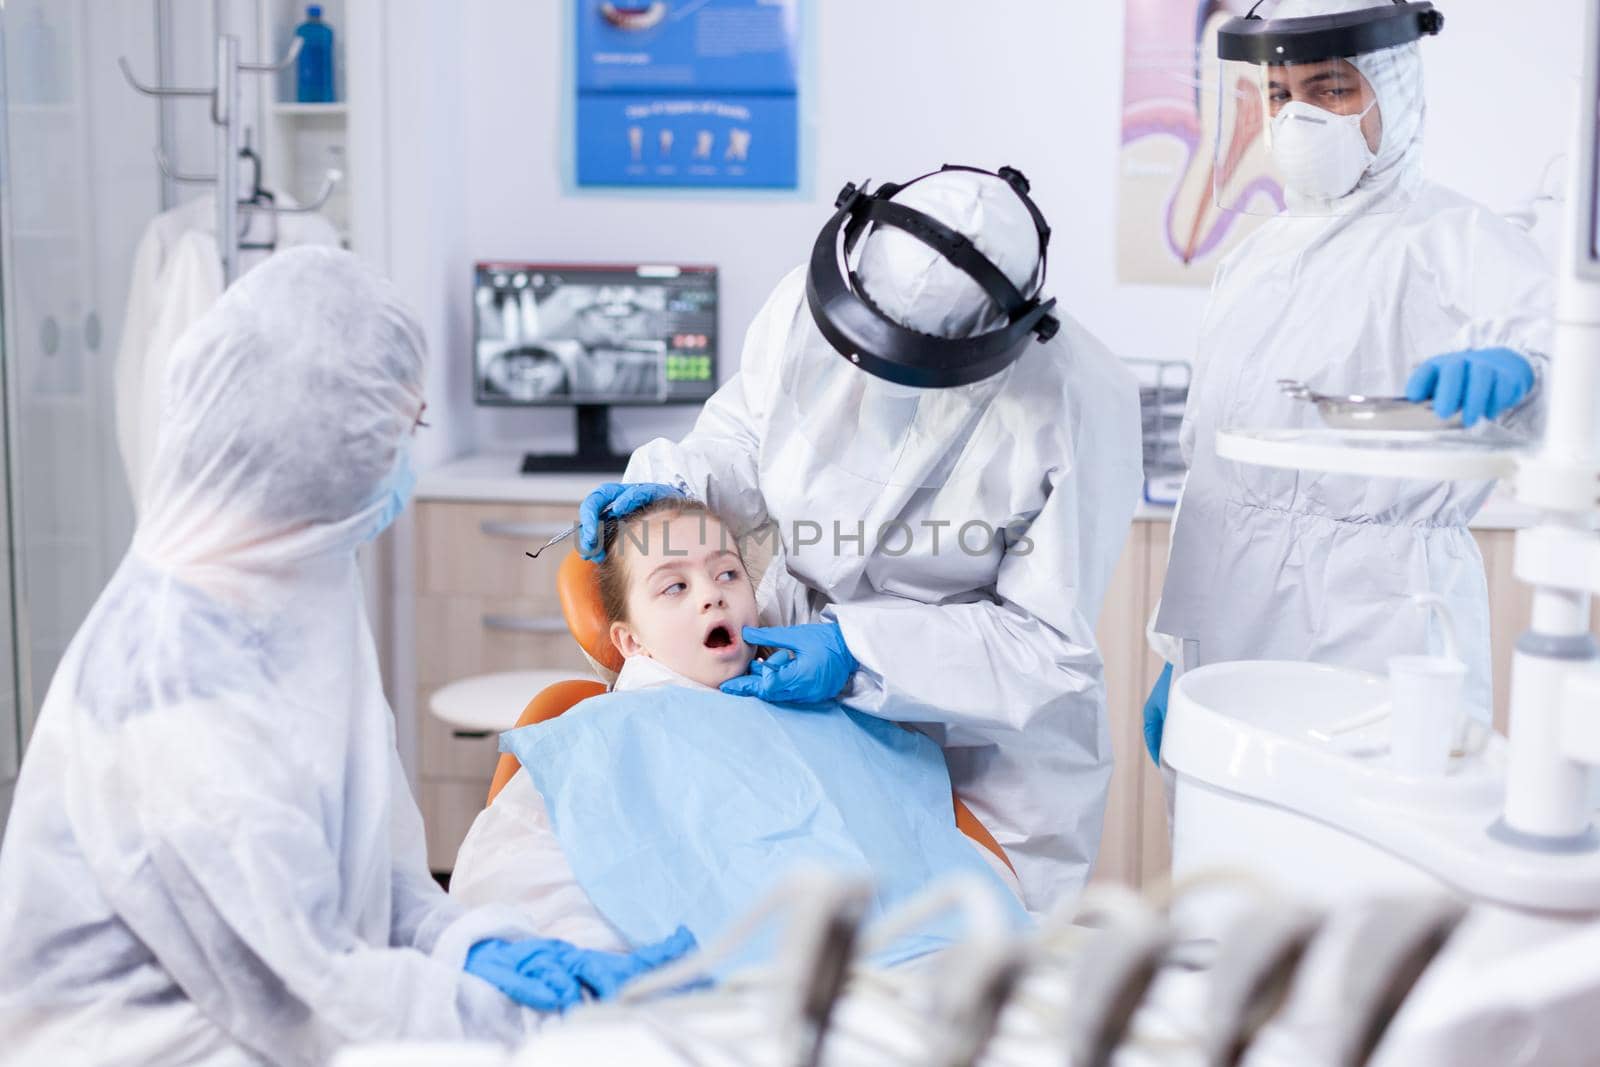 Little girl with mouth open sitting on dental chair by DCStudio